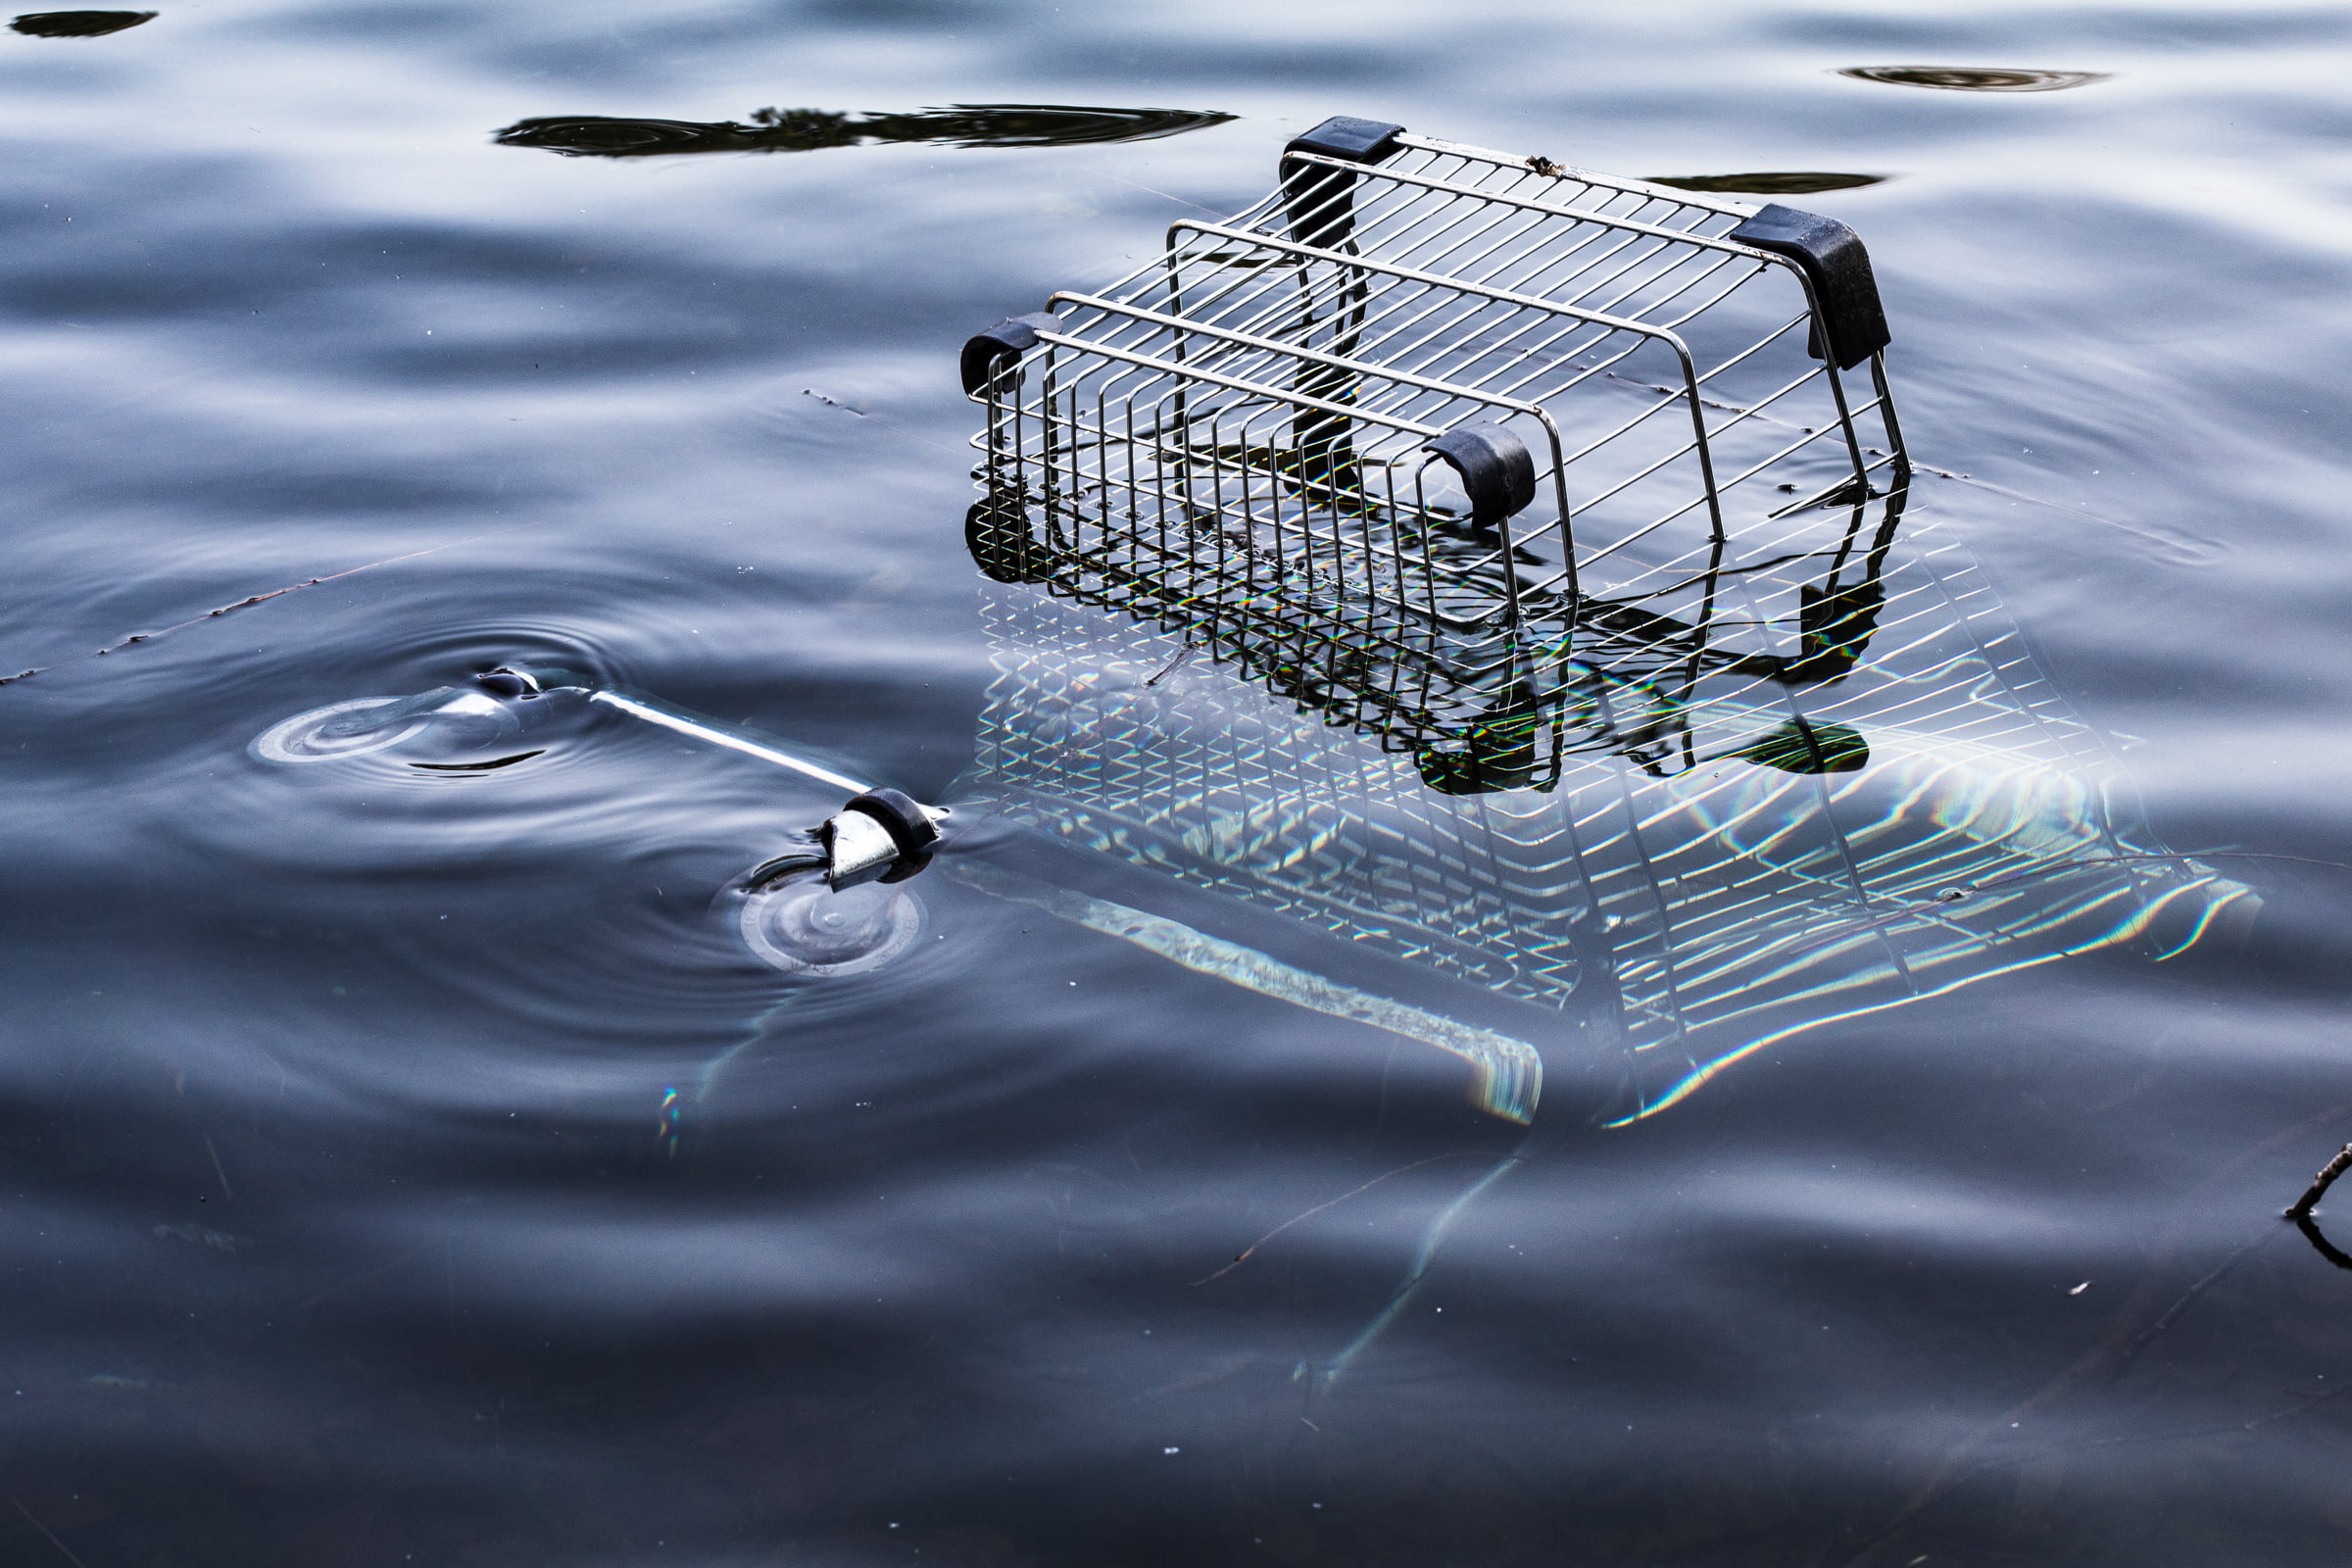 A shopping cart half submerged in a pond.